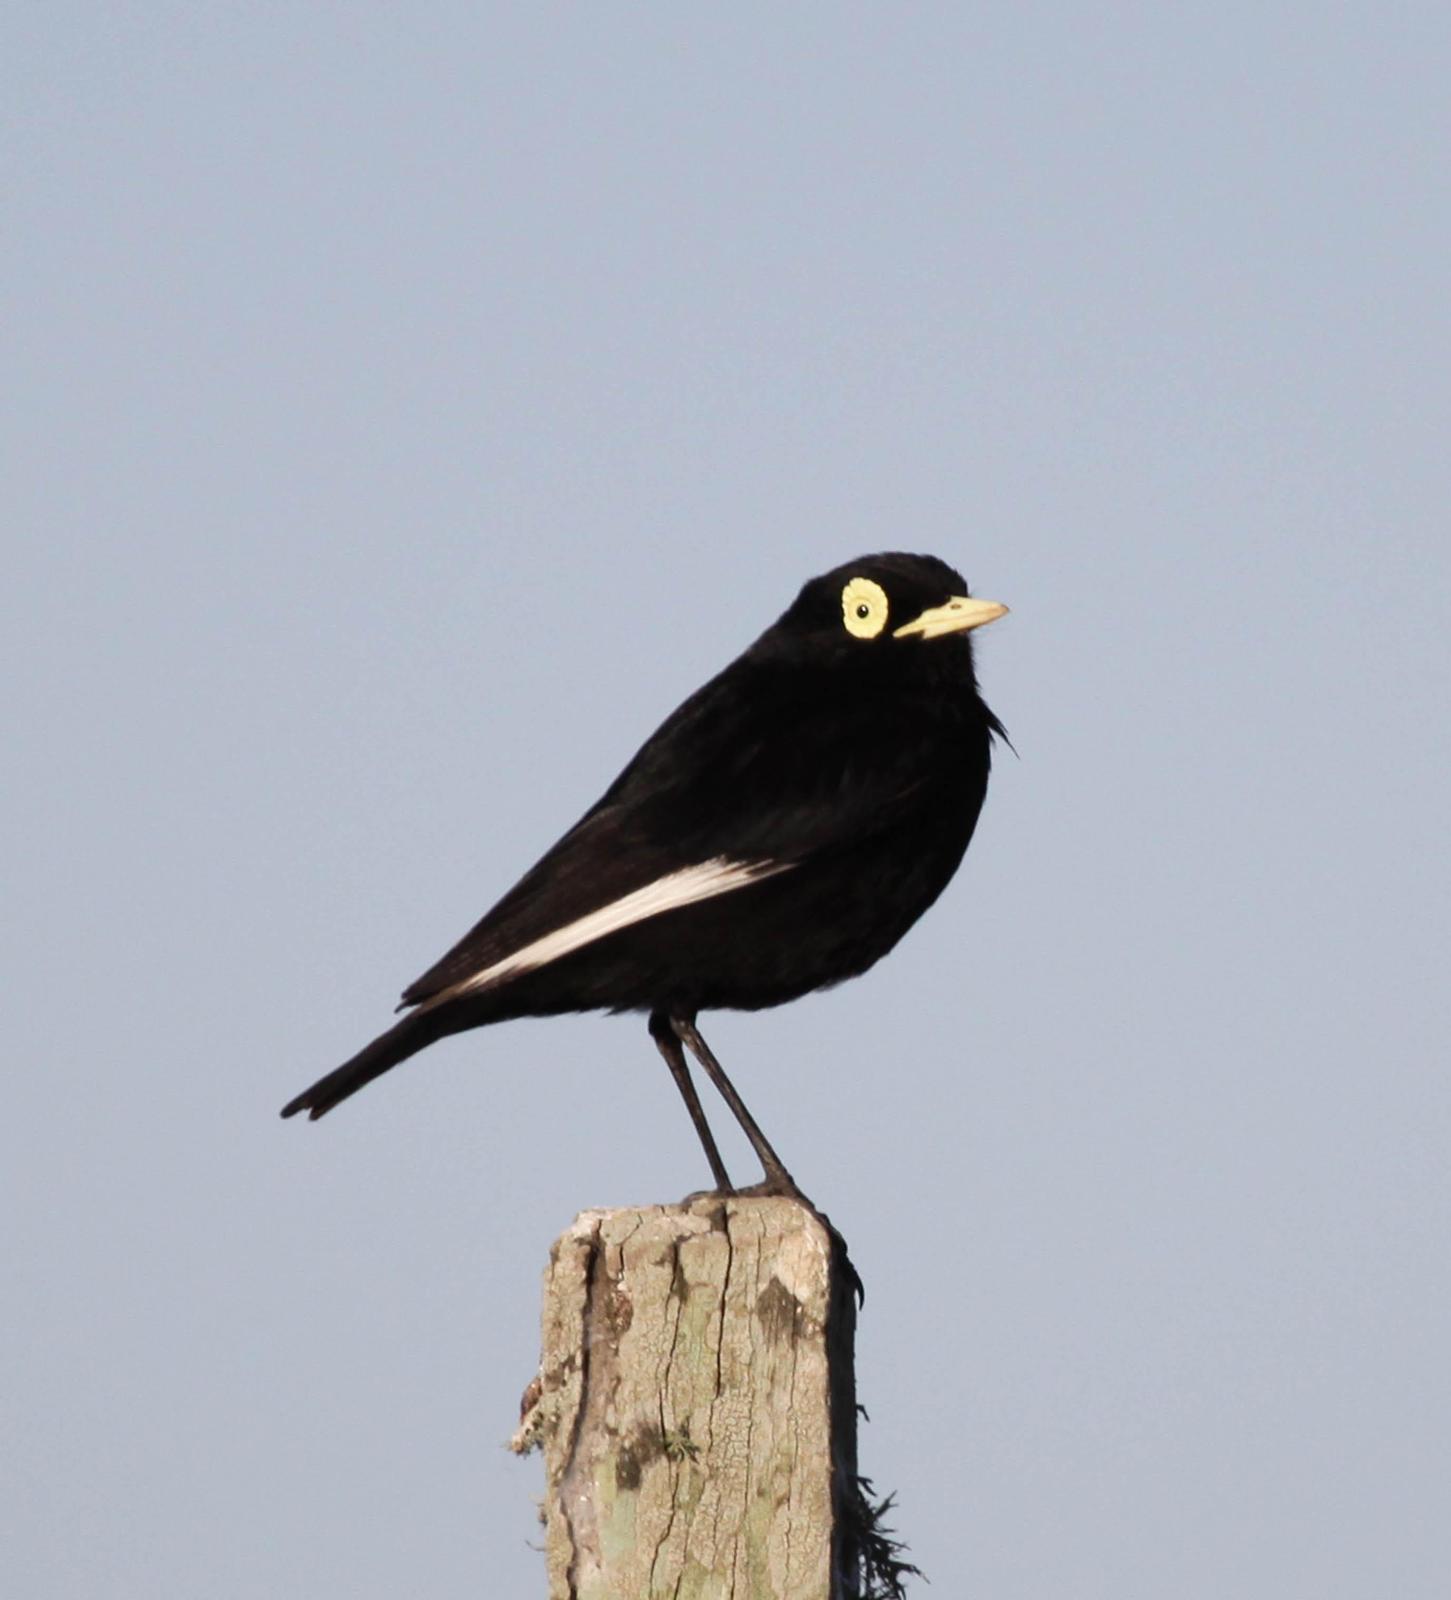 Spectacled Tyrant Photo by Marie Z. Gardner